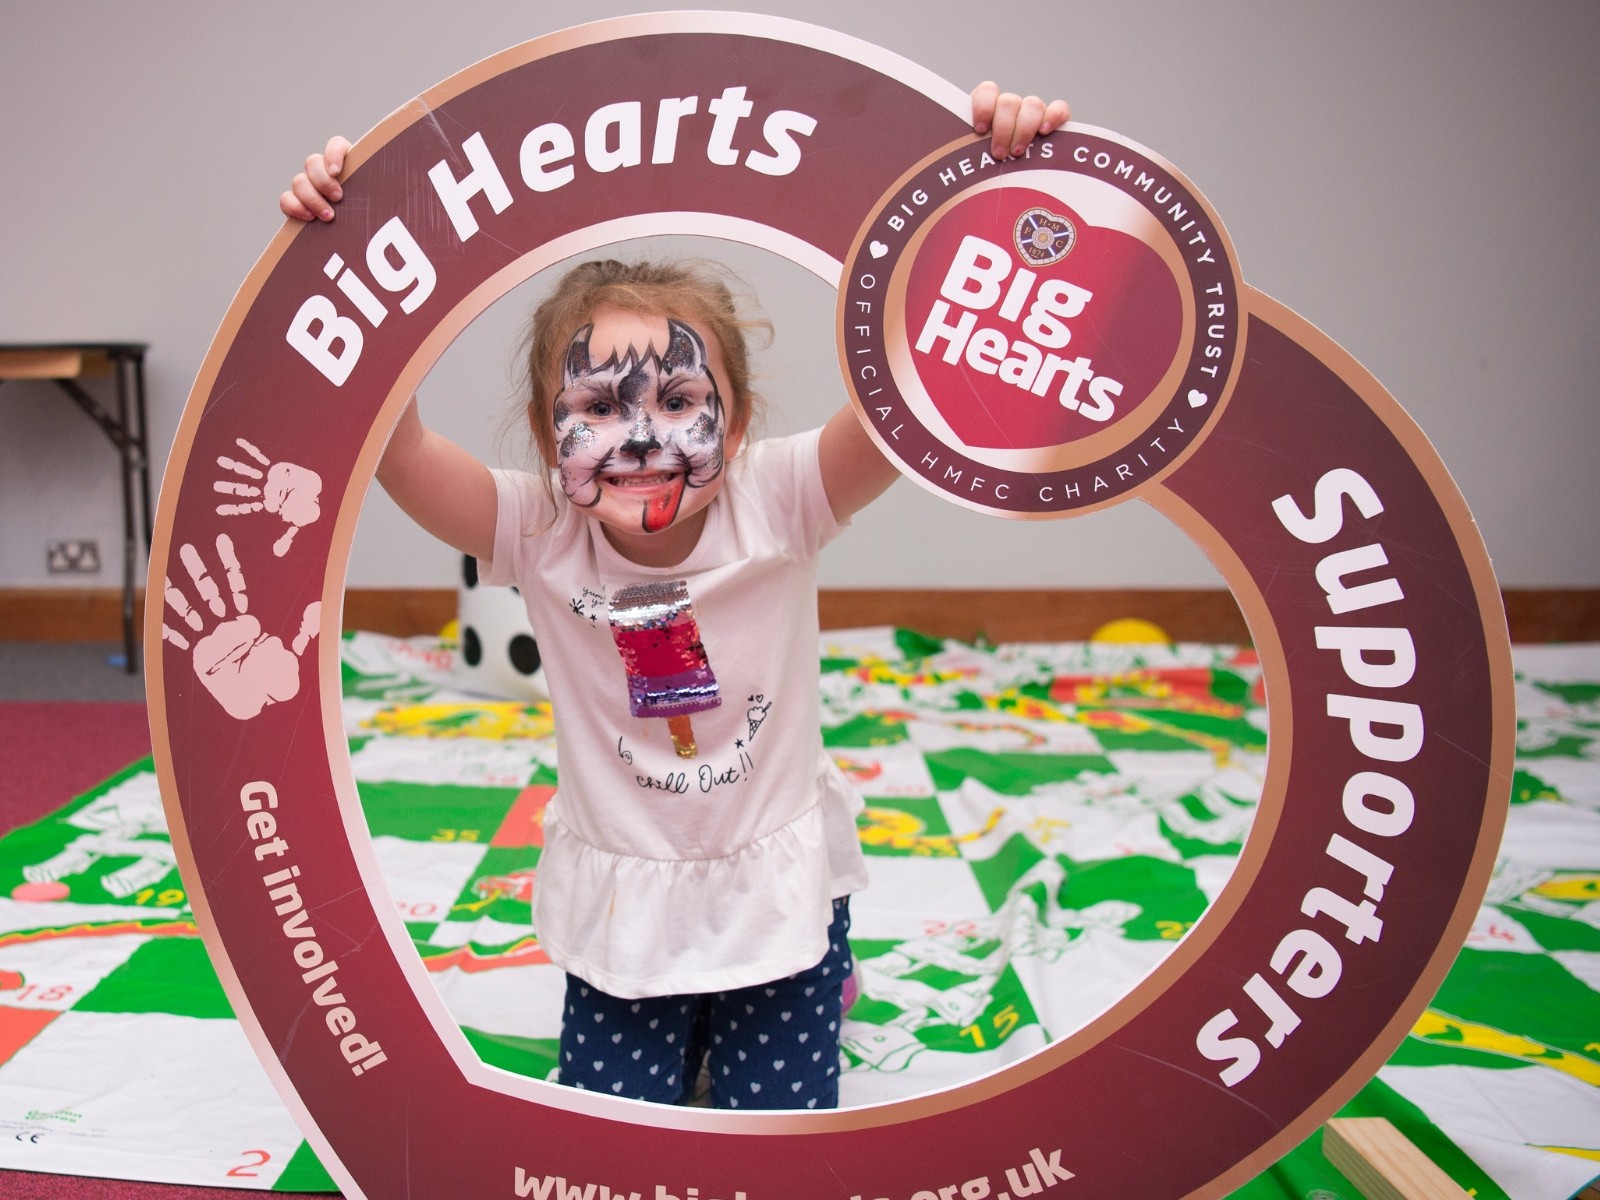  » Big Hearts celebrate 3 years of support to Kinship Care families